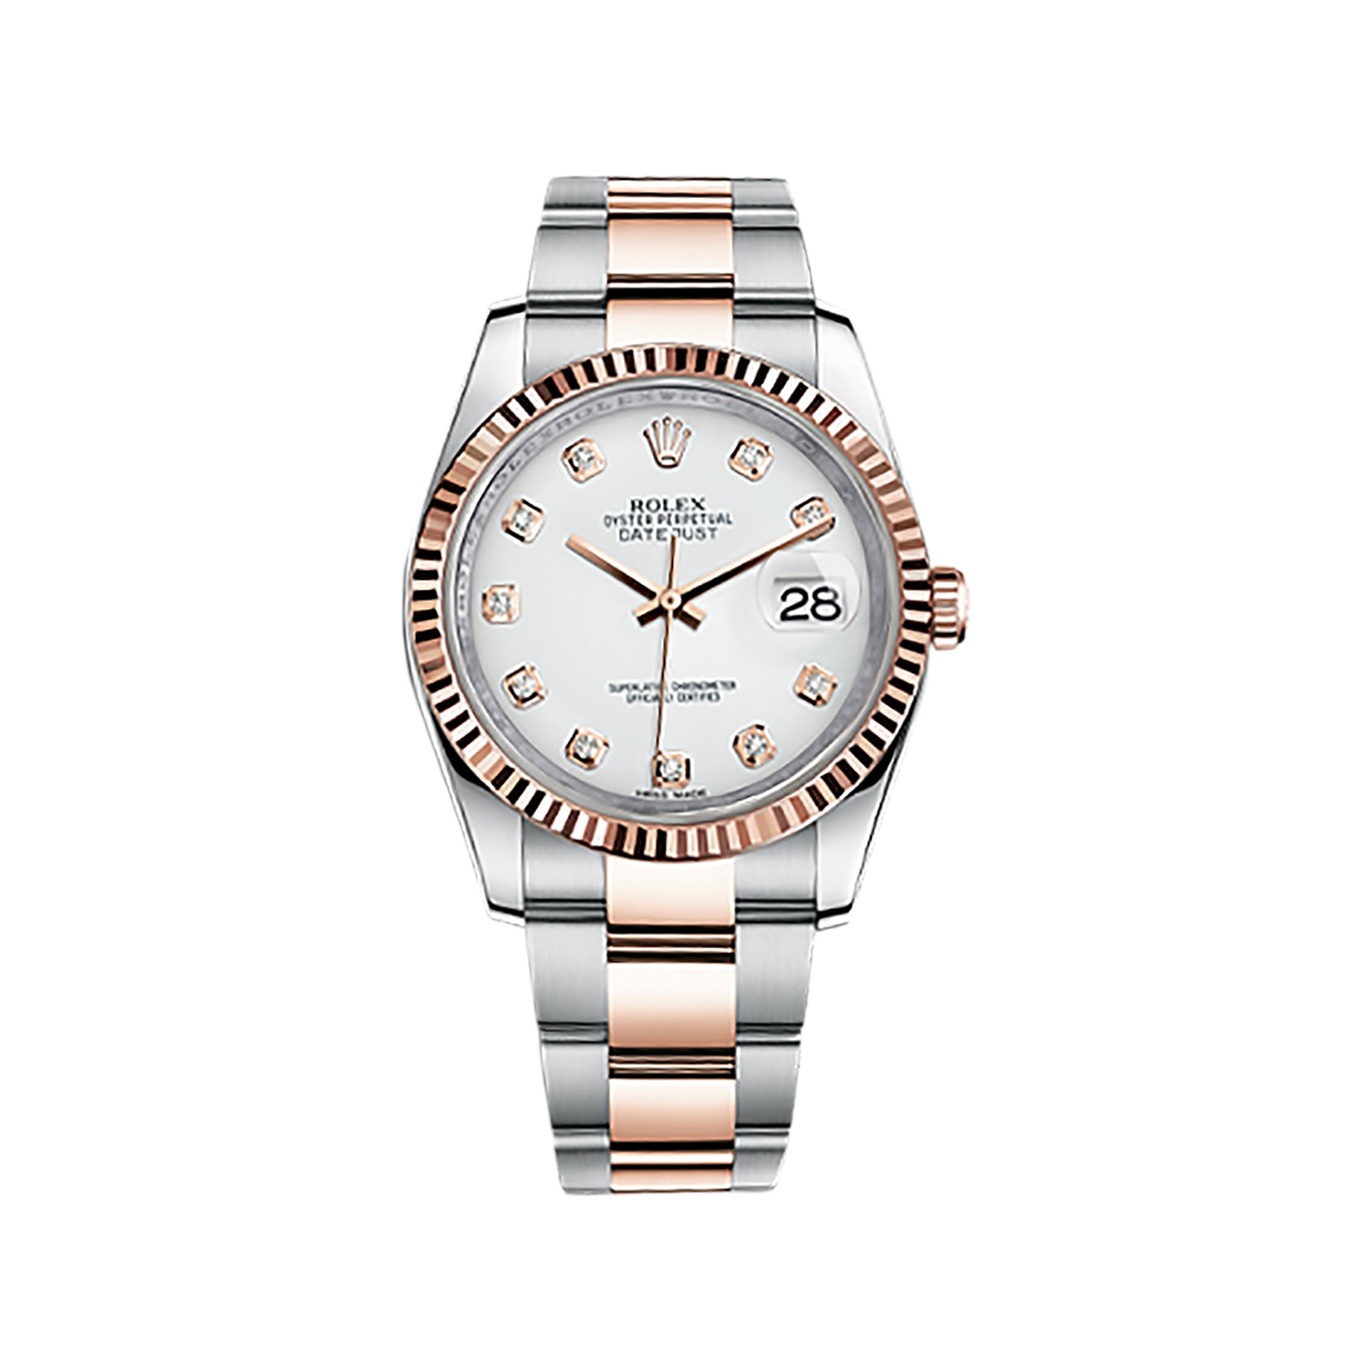 Datejust 36 116231 Rose Gold & Stainless Steel Watch (White Set with Diamonds)